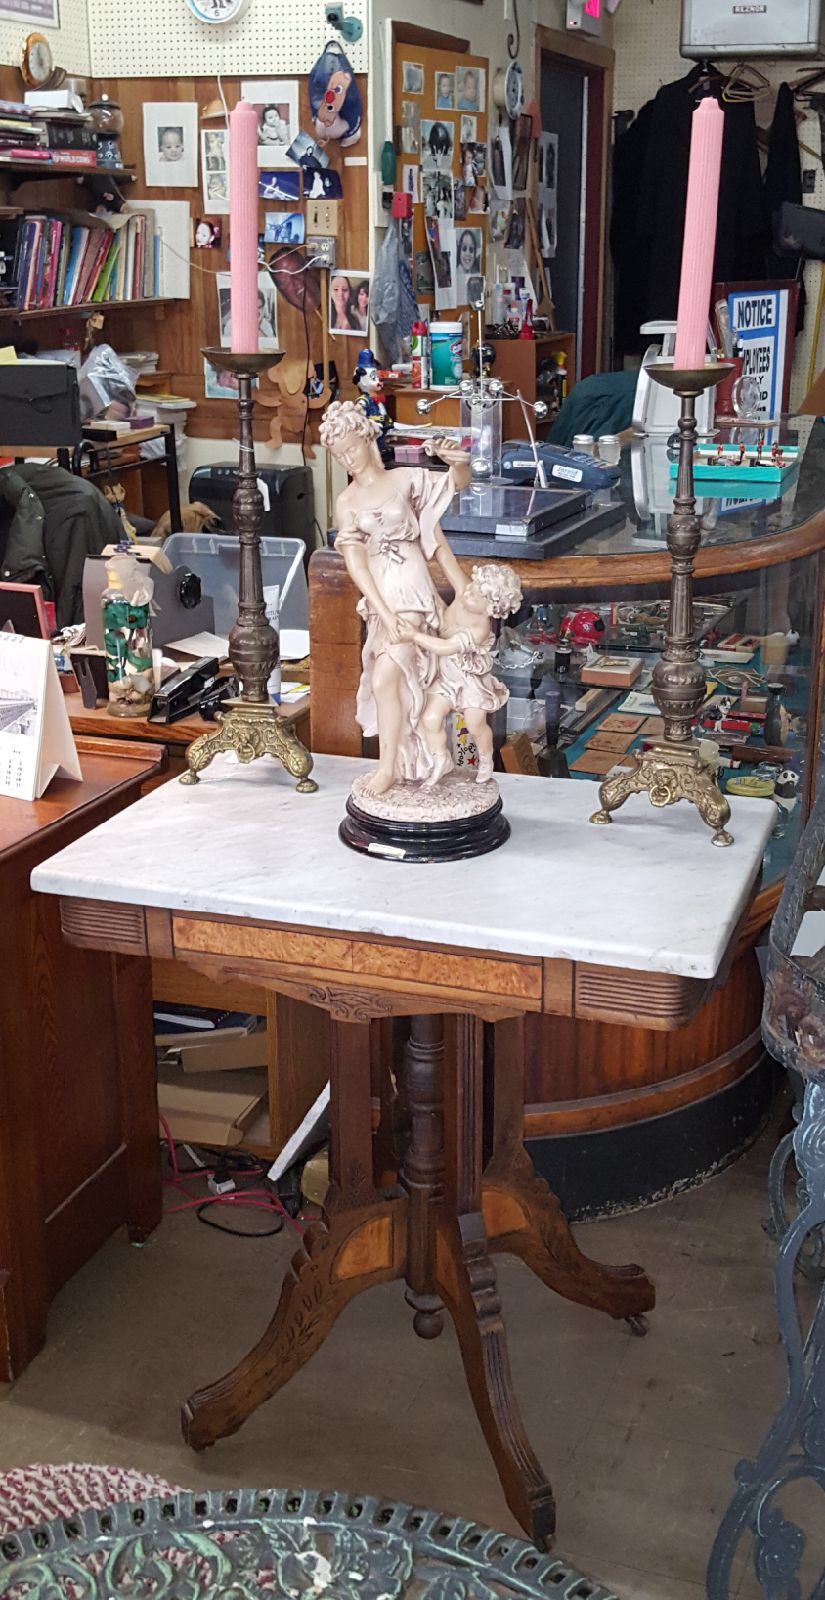 Marble top table $175 candelabras $150 candlesticks are 20 3/4" tall not including candles Statue is 55.00 & is 19" tall